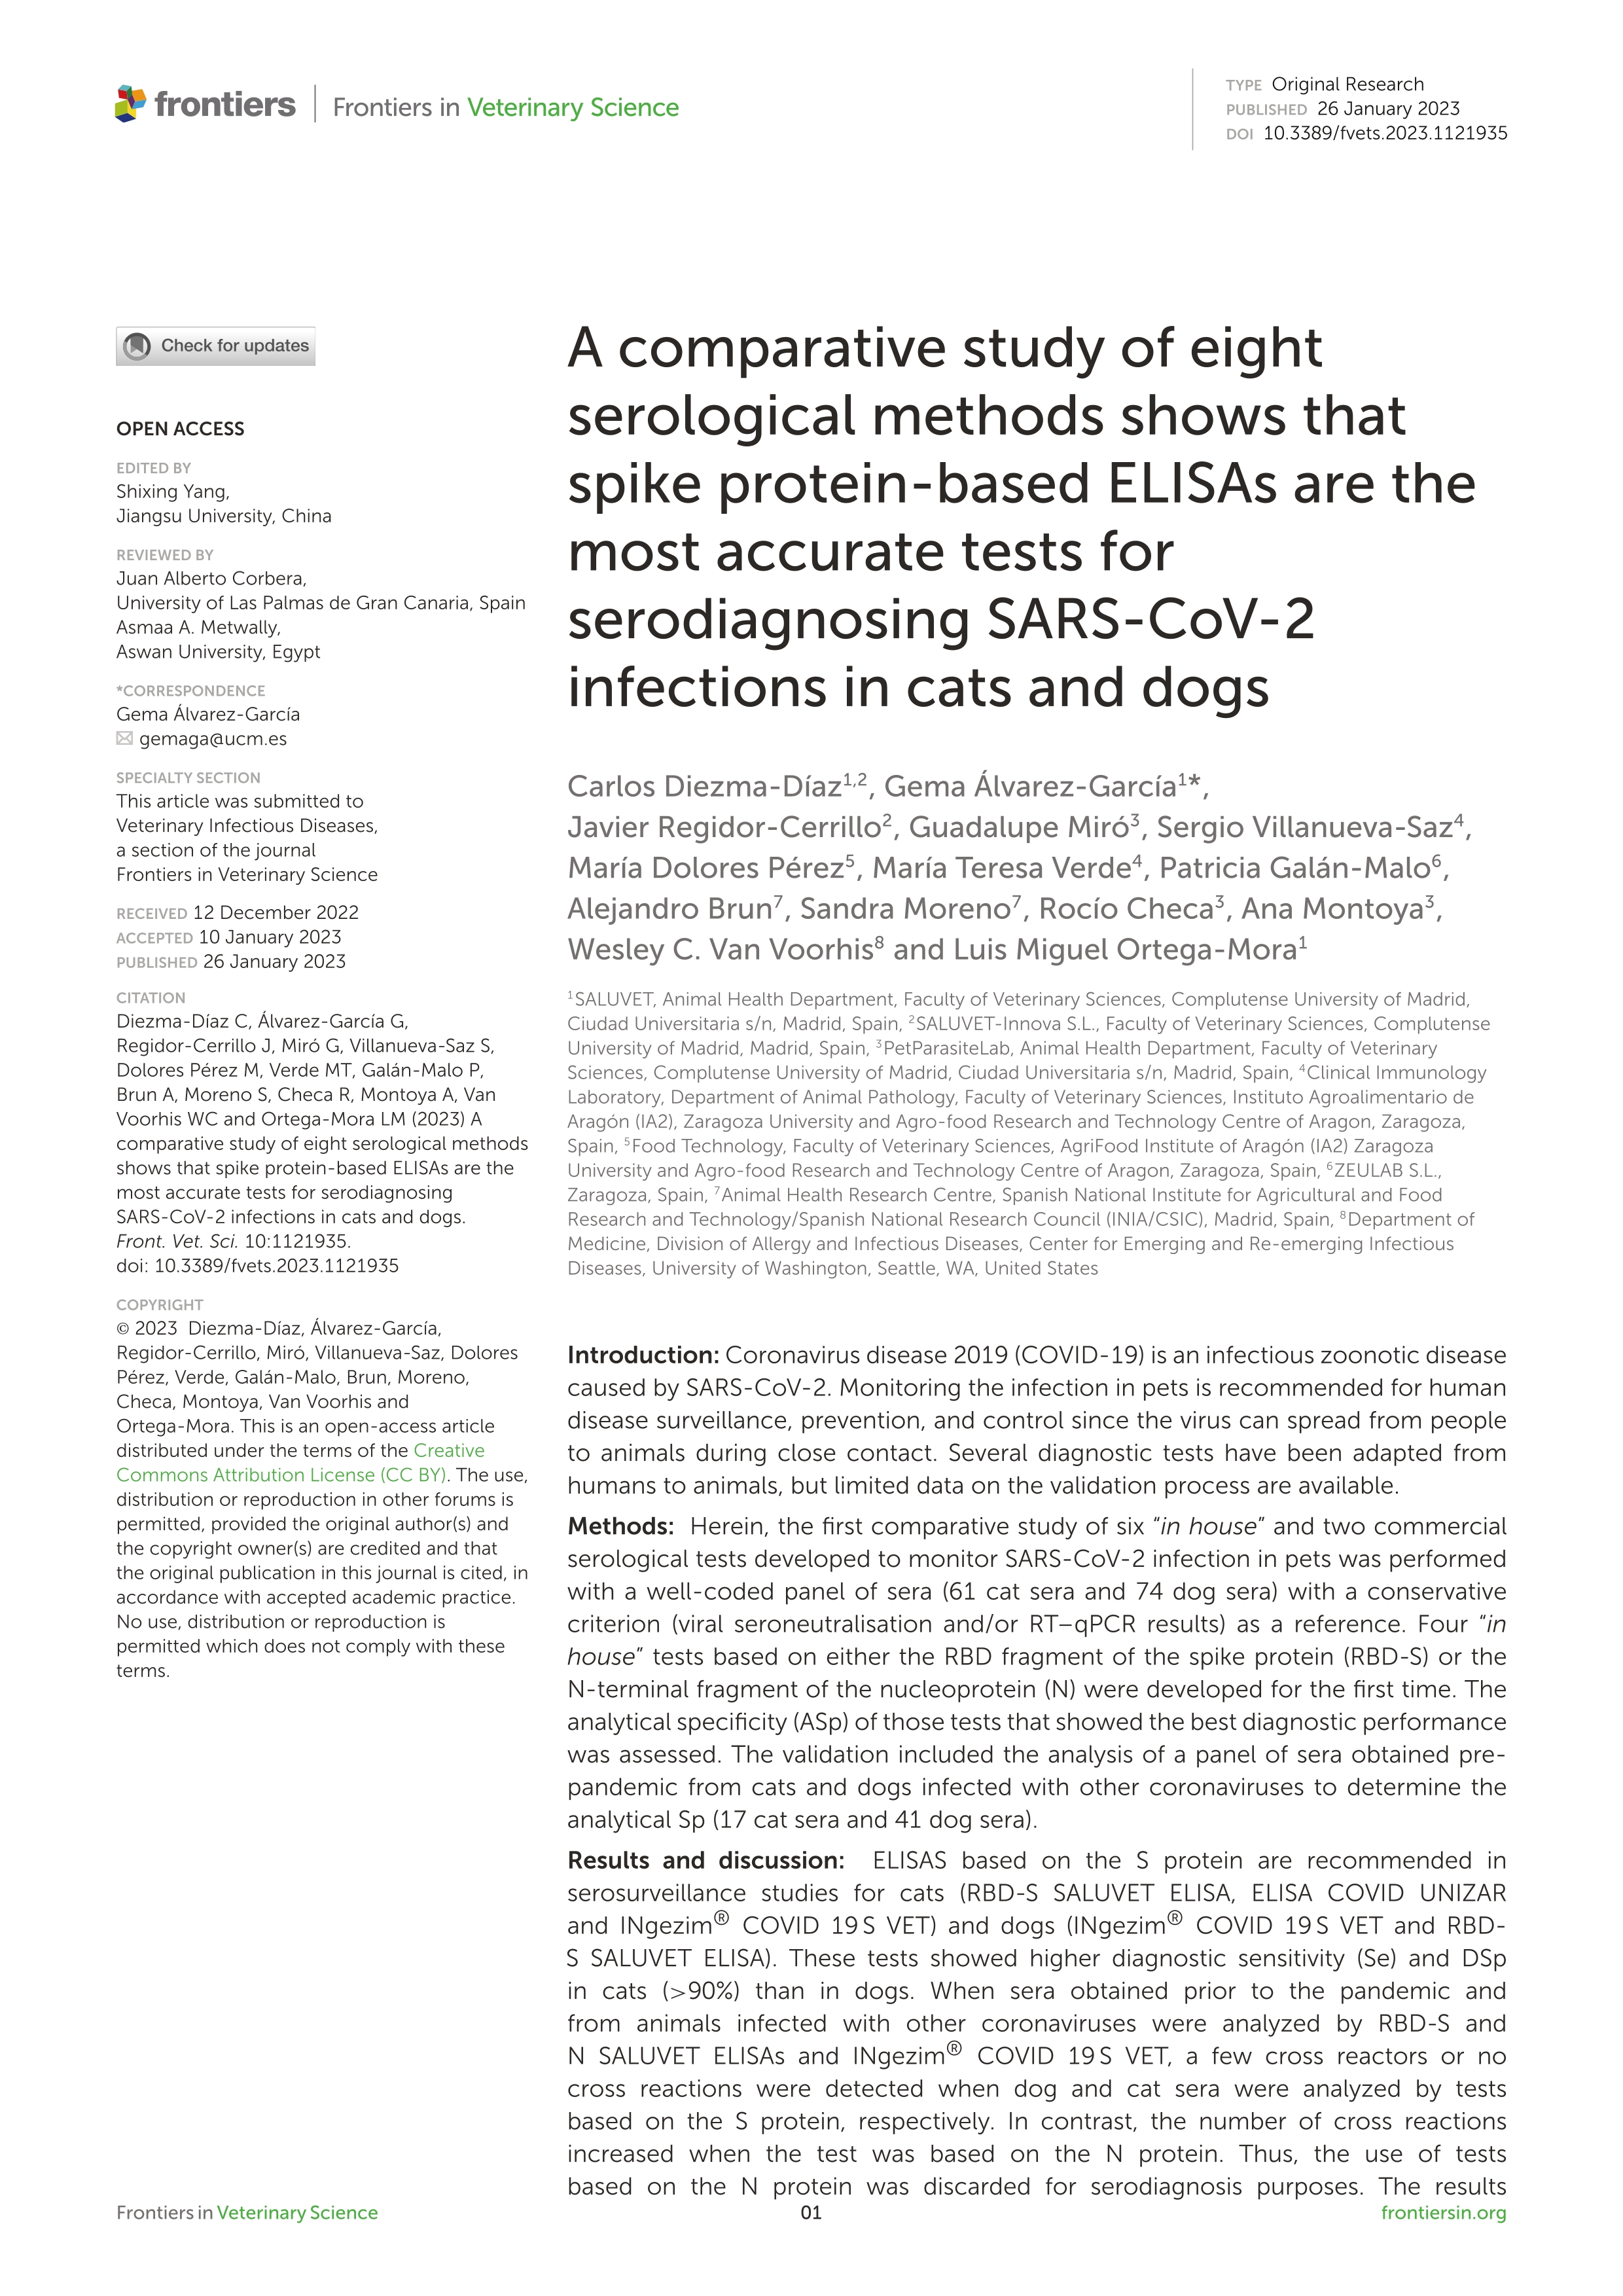 A comparative study of eight serological methods shows that spike protein-based ELISAs are the most accurate tests for serodiagnosing SARS-CoV-2 infections in cats and dogs